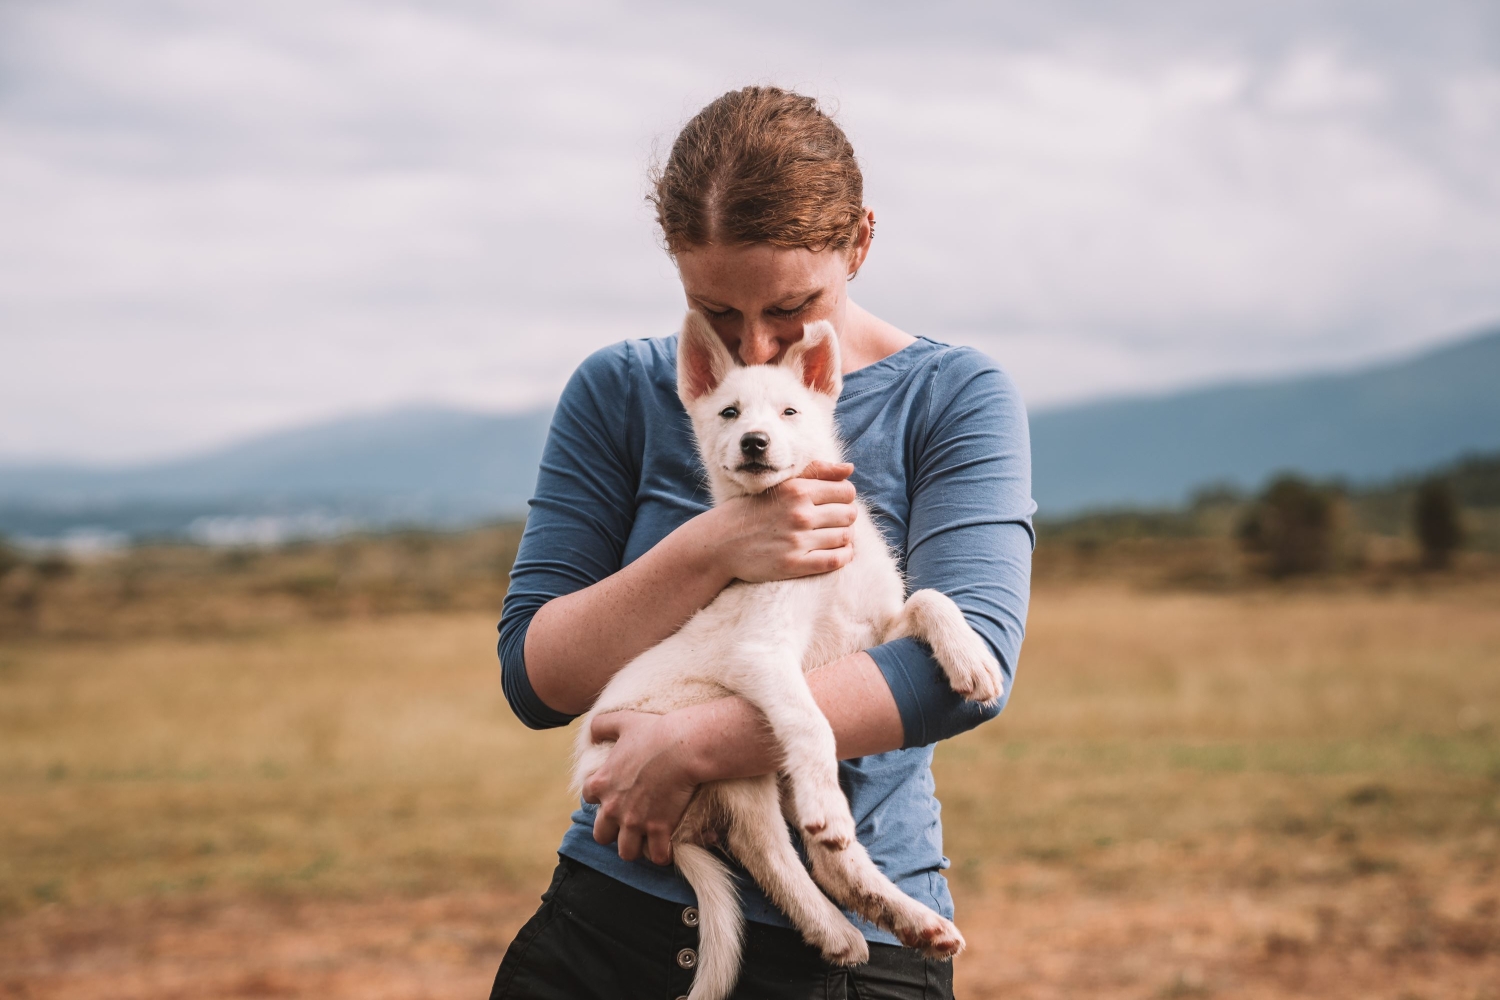 Lady holding a puppy